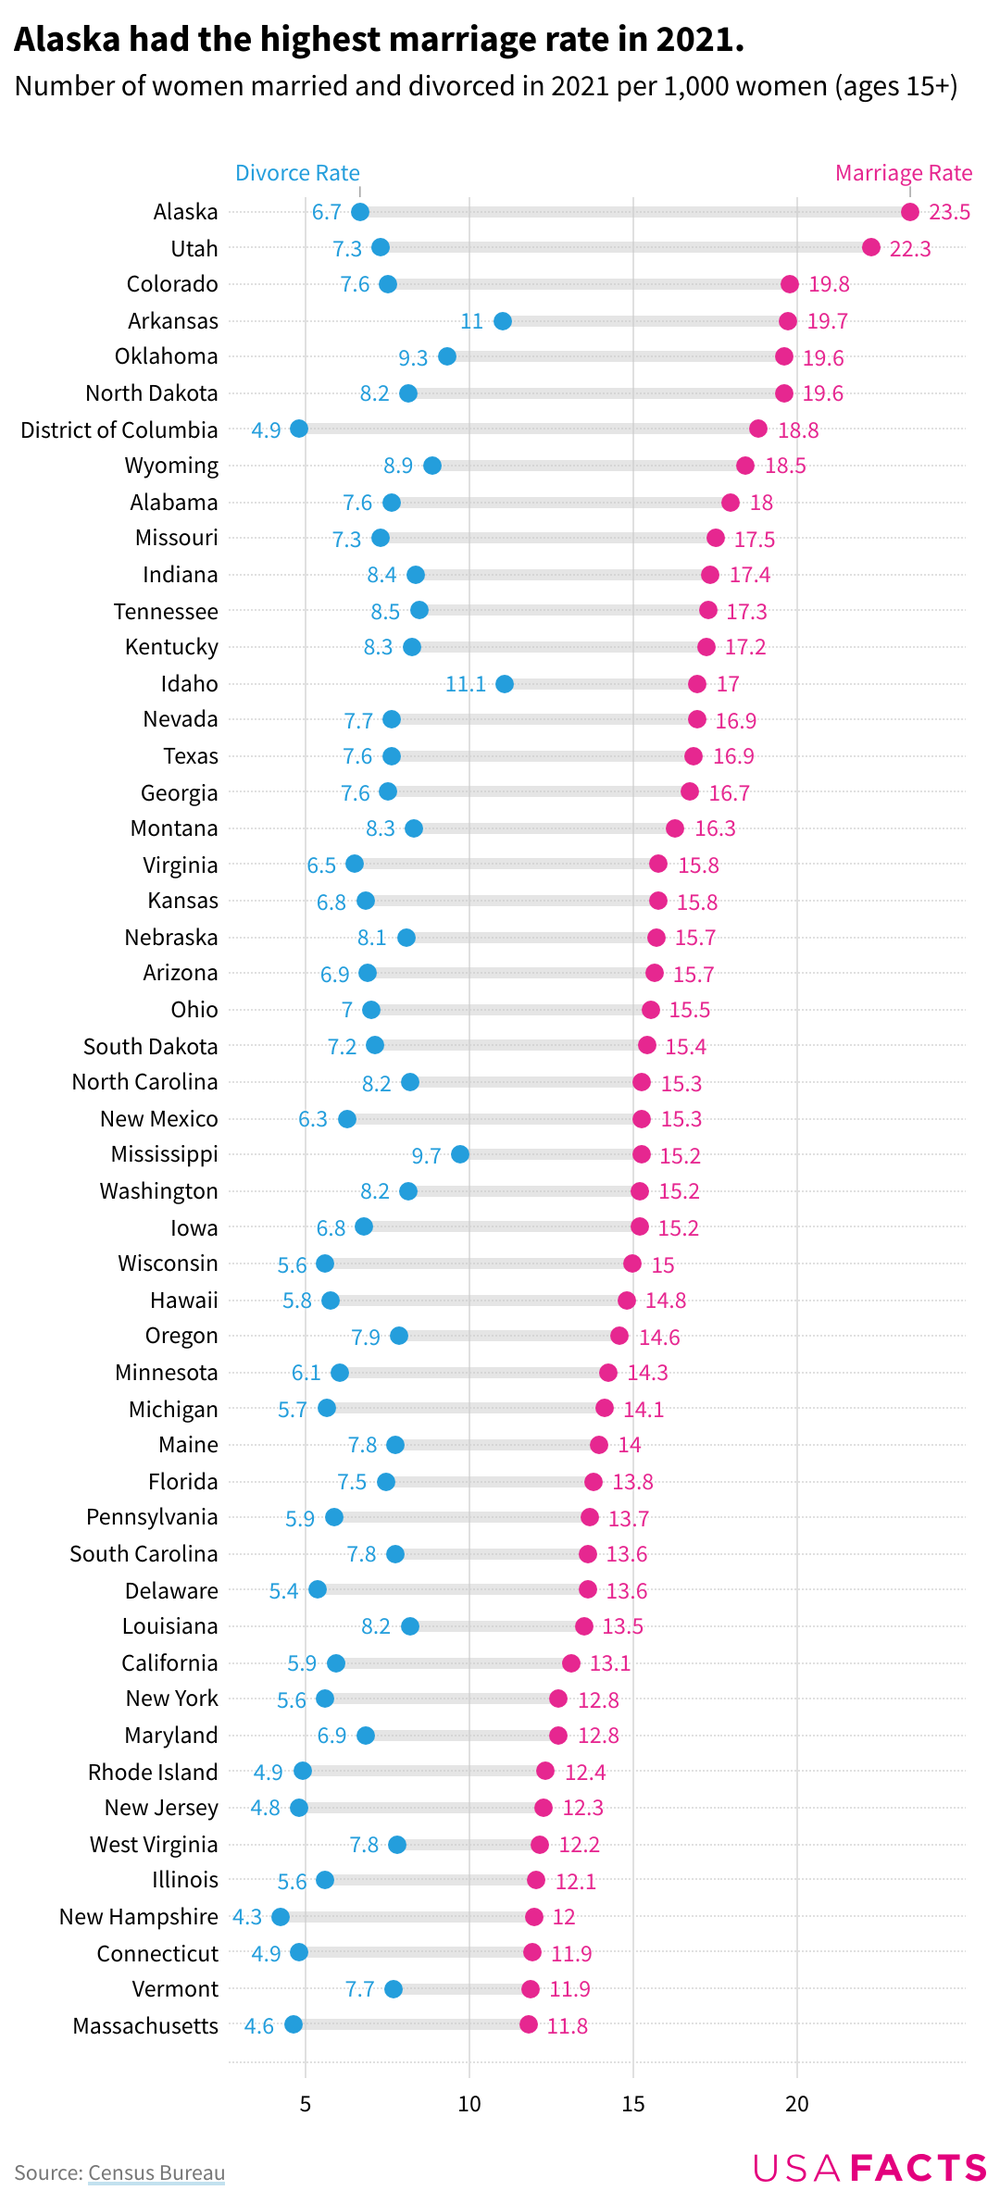 Range plot that compares the marriage and divorce rate in each state.